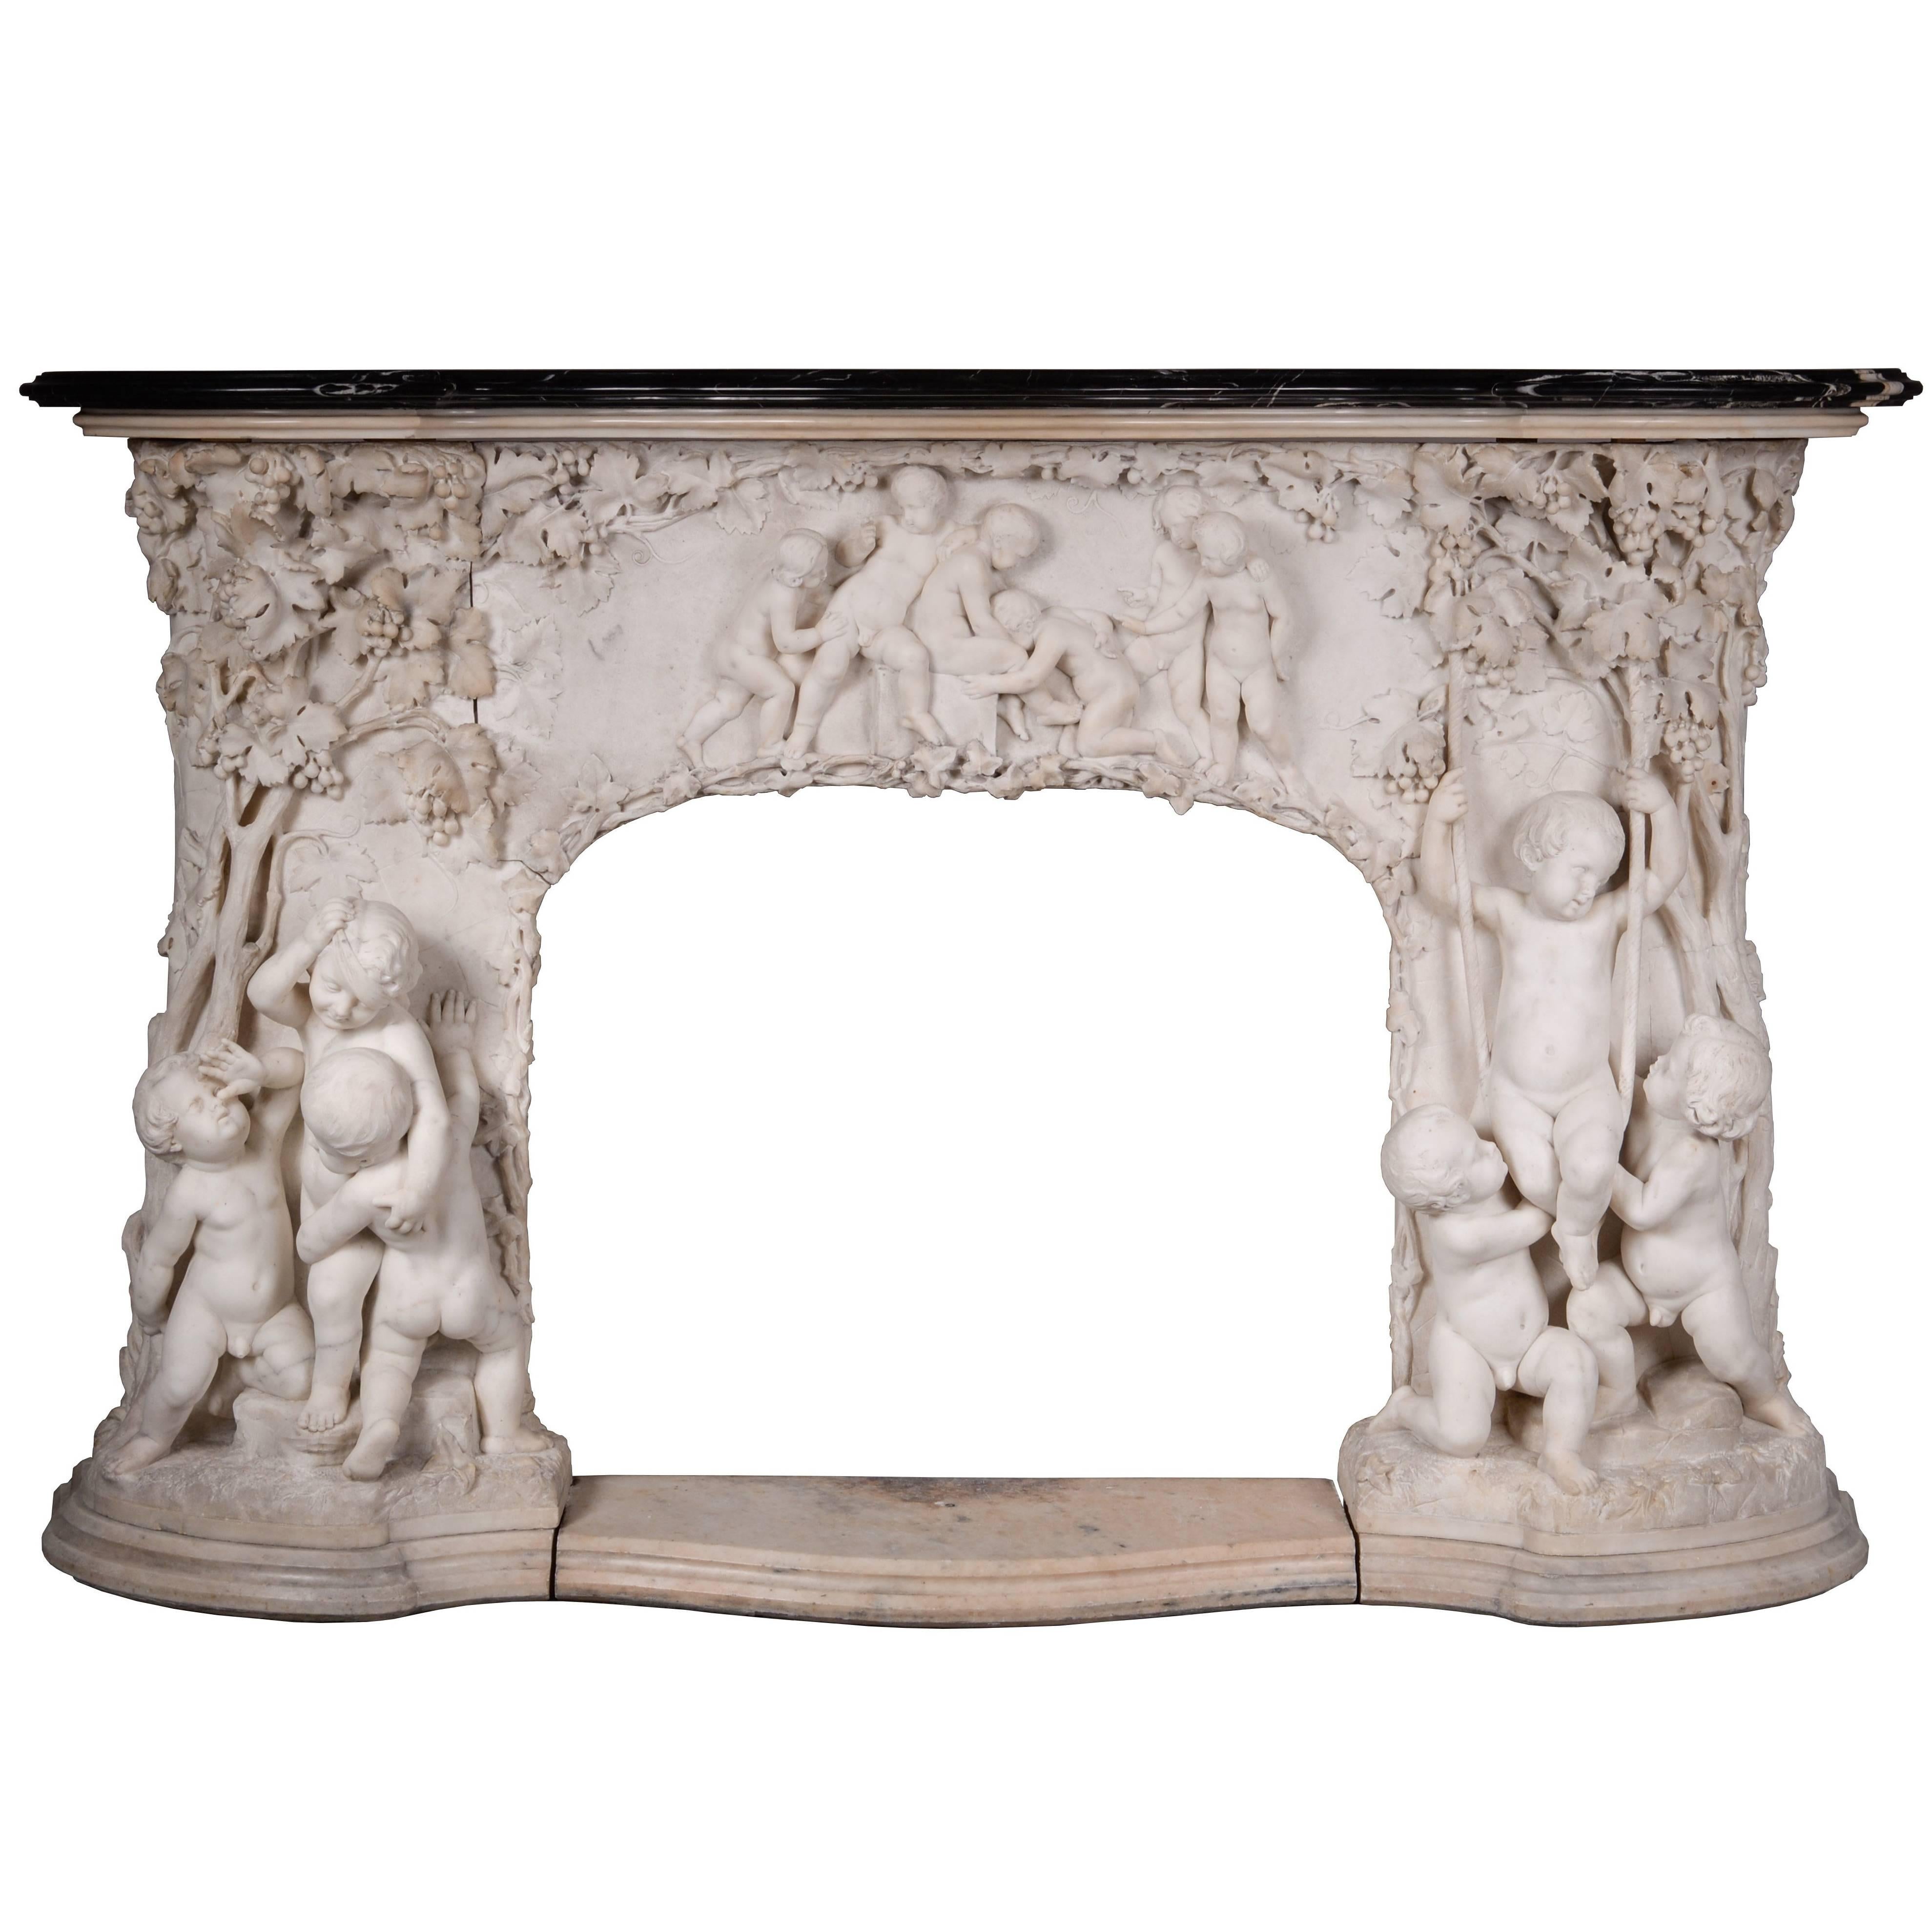 Extraordinary Antique Statuary Marble Fireplace Carved in High Relief with Putti For Sale